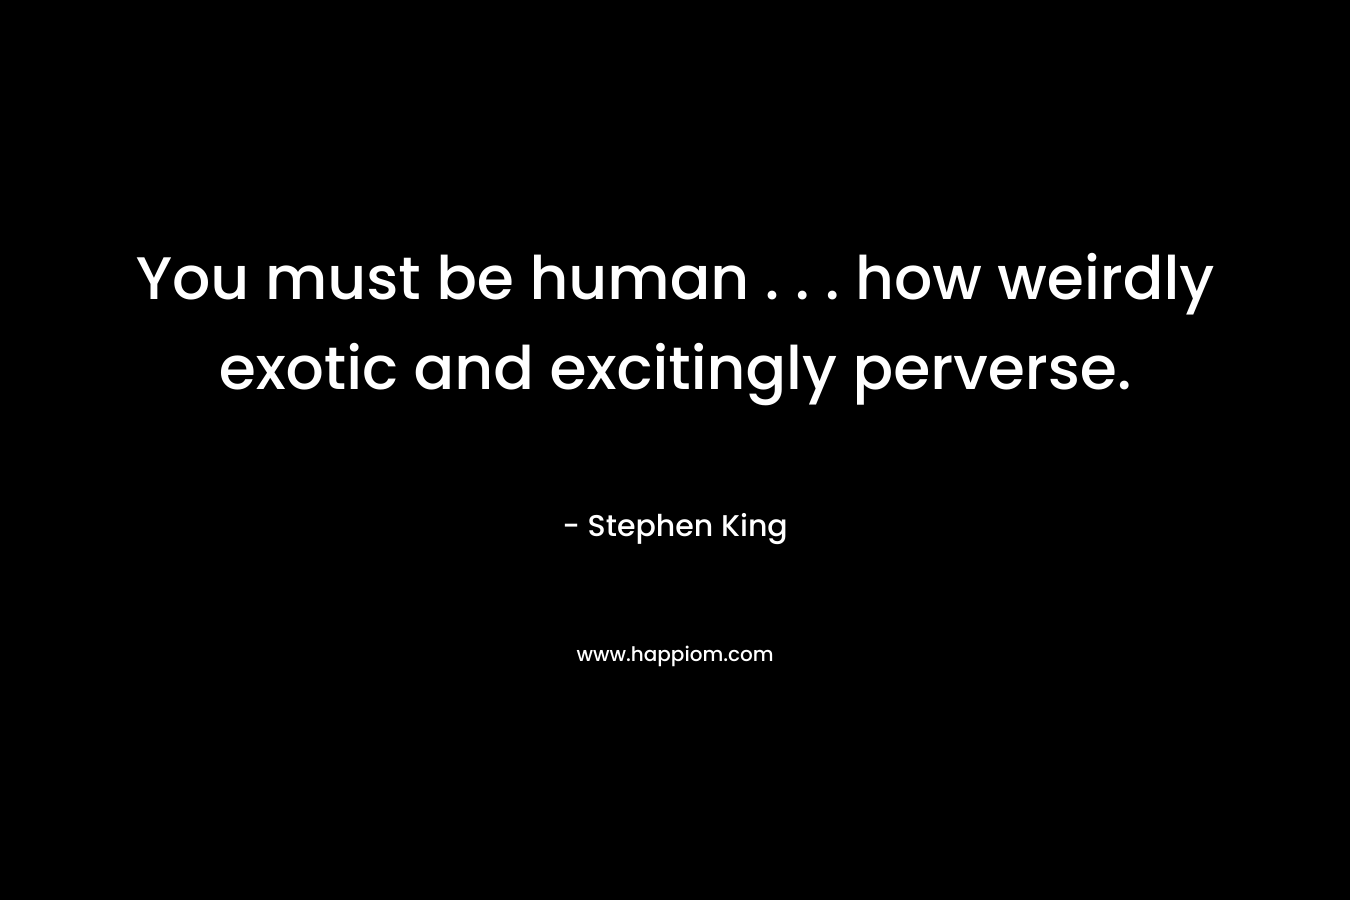 You must be human . . . how weirdly exotic and excitingly perverse.